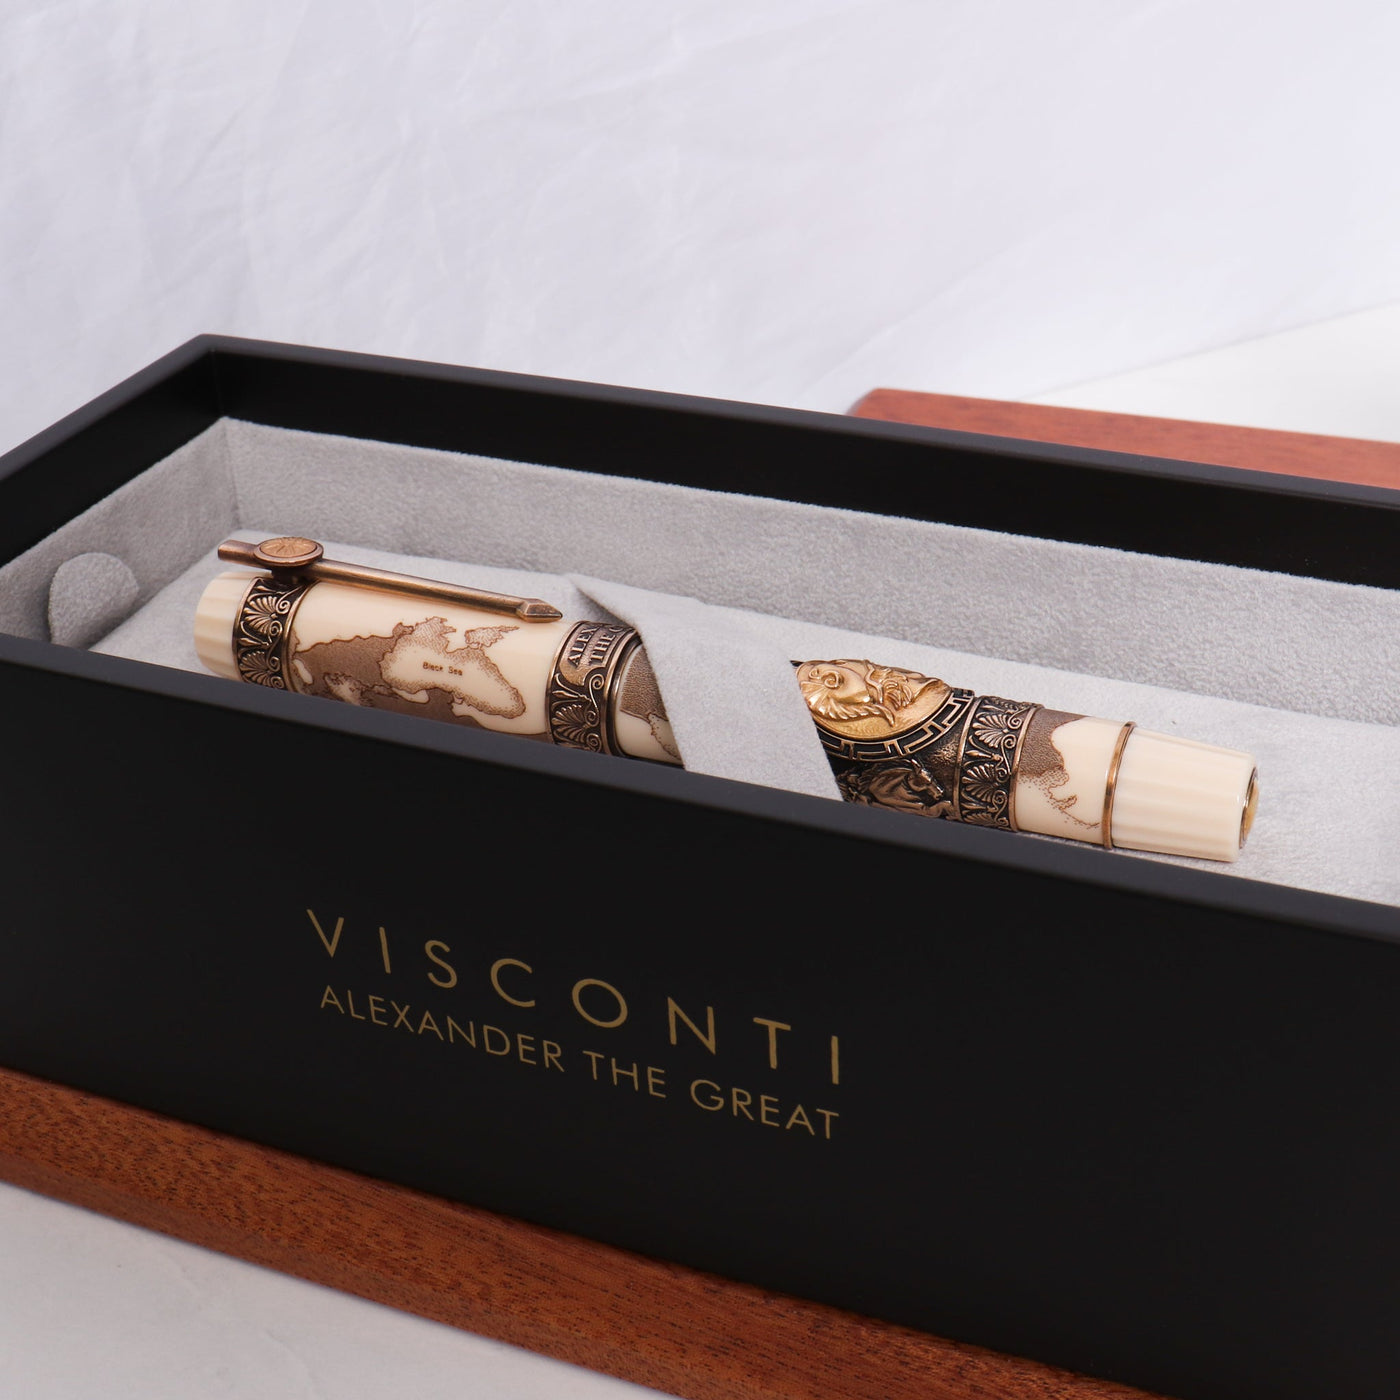 Visconti Alexander the Great Limited Edition Fountain Pen Packaging